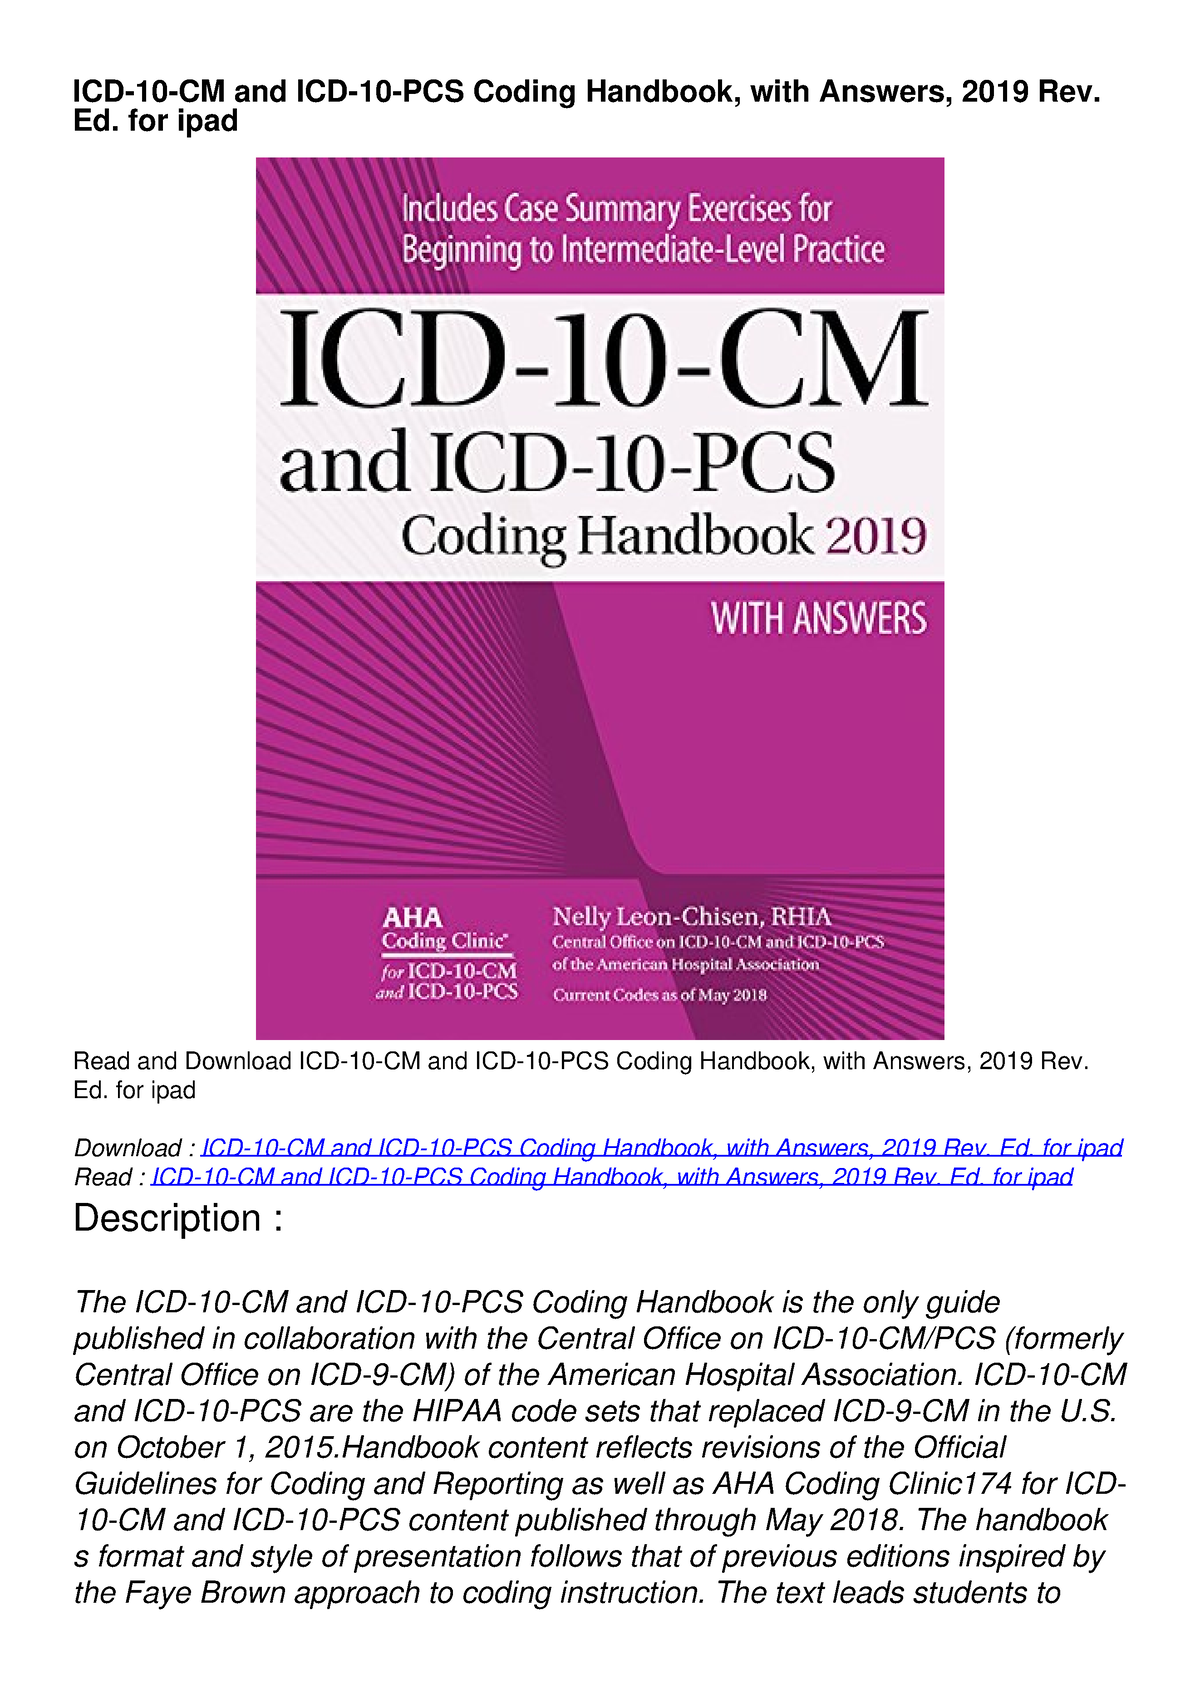 Read Icd 10 Cm And Icd 10 Pcs Coding Handbook With Answers 2019 Rev Ed For I Icd 10 Cm And 1408